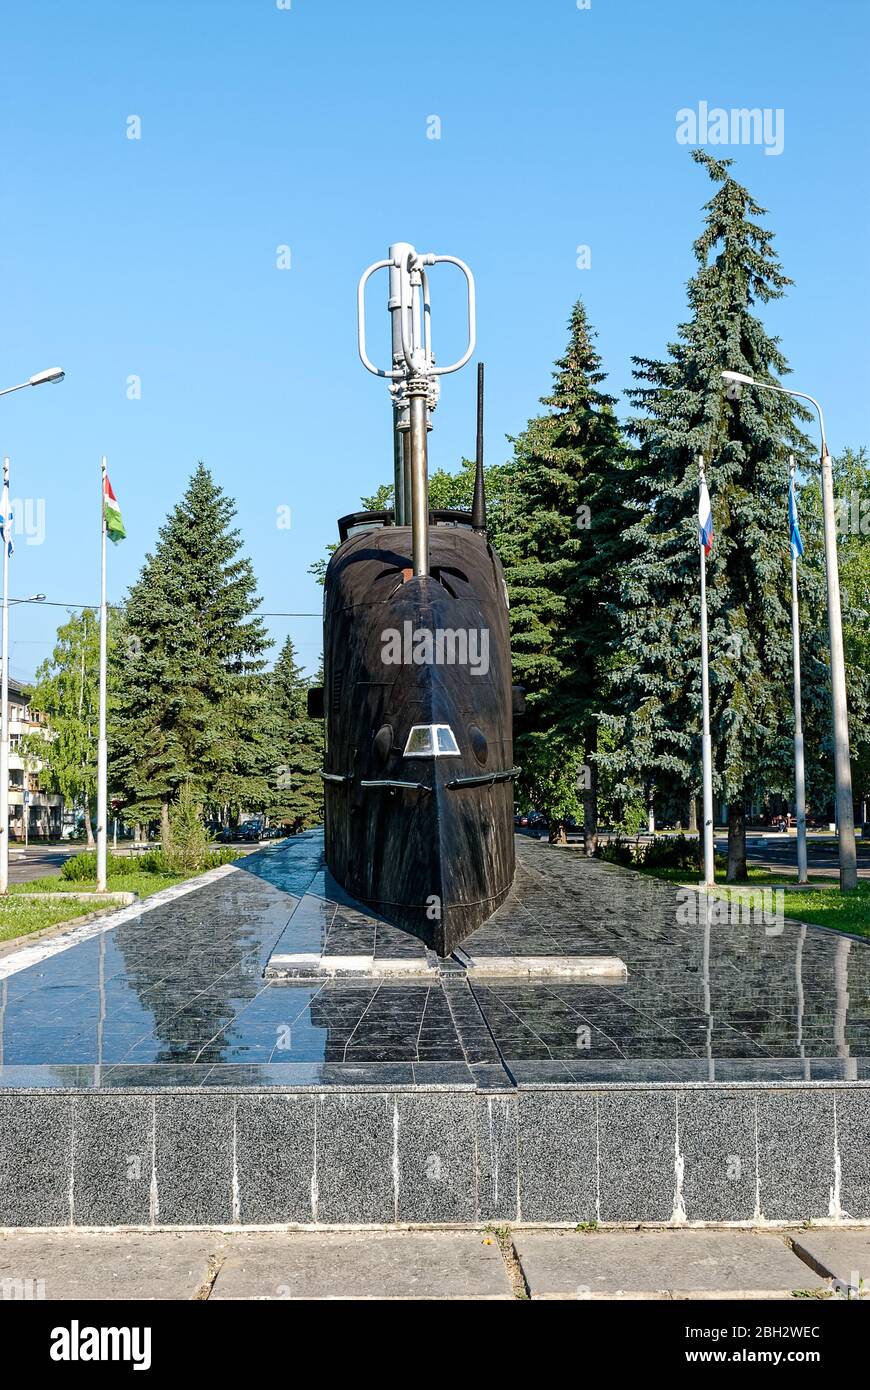 Kaluga Region, Obninsk, Russia June 25, 2013: Monument to the pioneer of the nuclear submarine fleet. The real cabin of the nuclear submarine K-14. Stock Photo